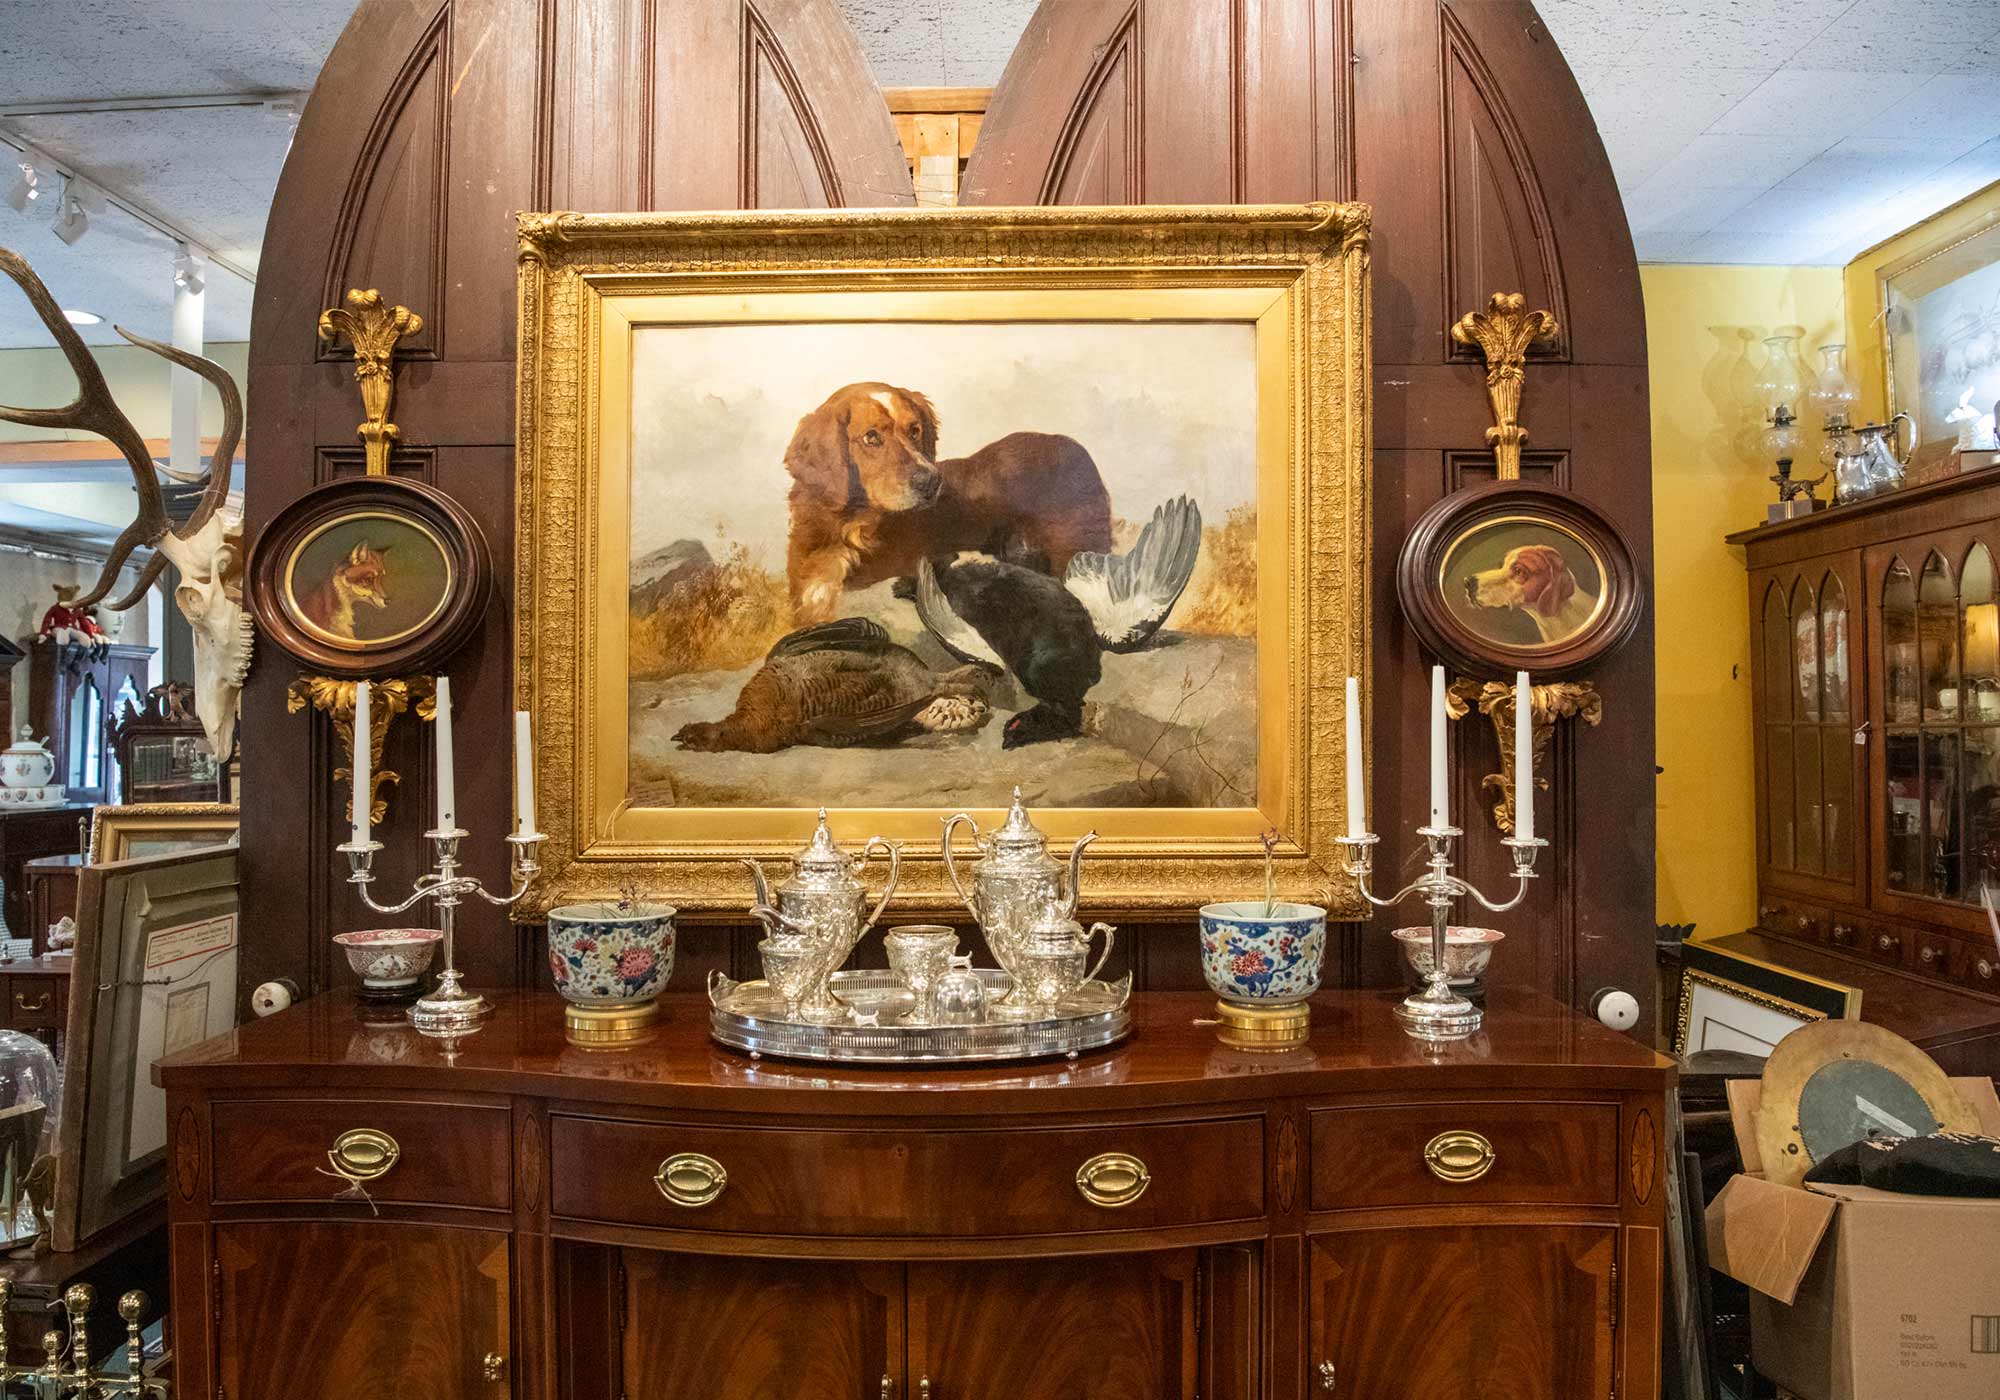 Oil painting of hunting dog in gilt frame at Middleburg Antiques Gallery in Middleburg, VA